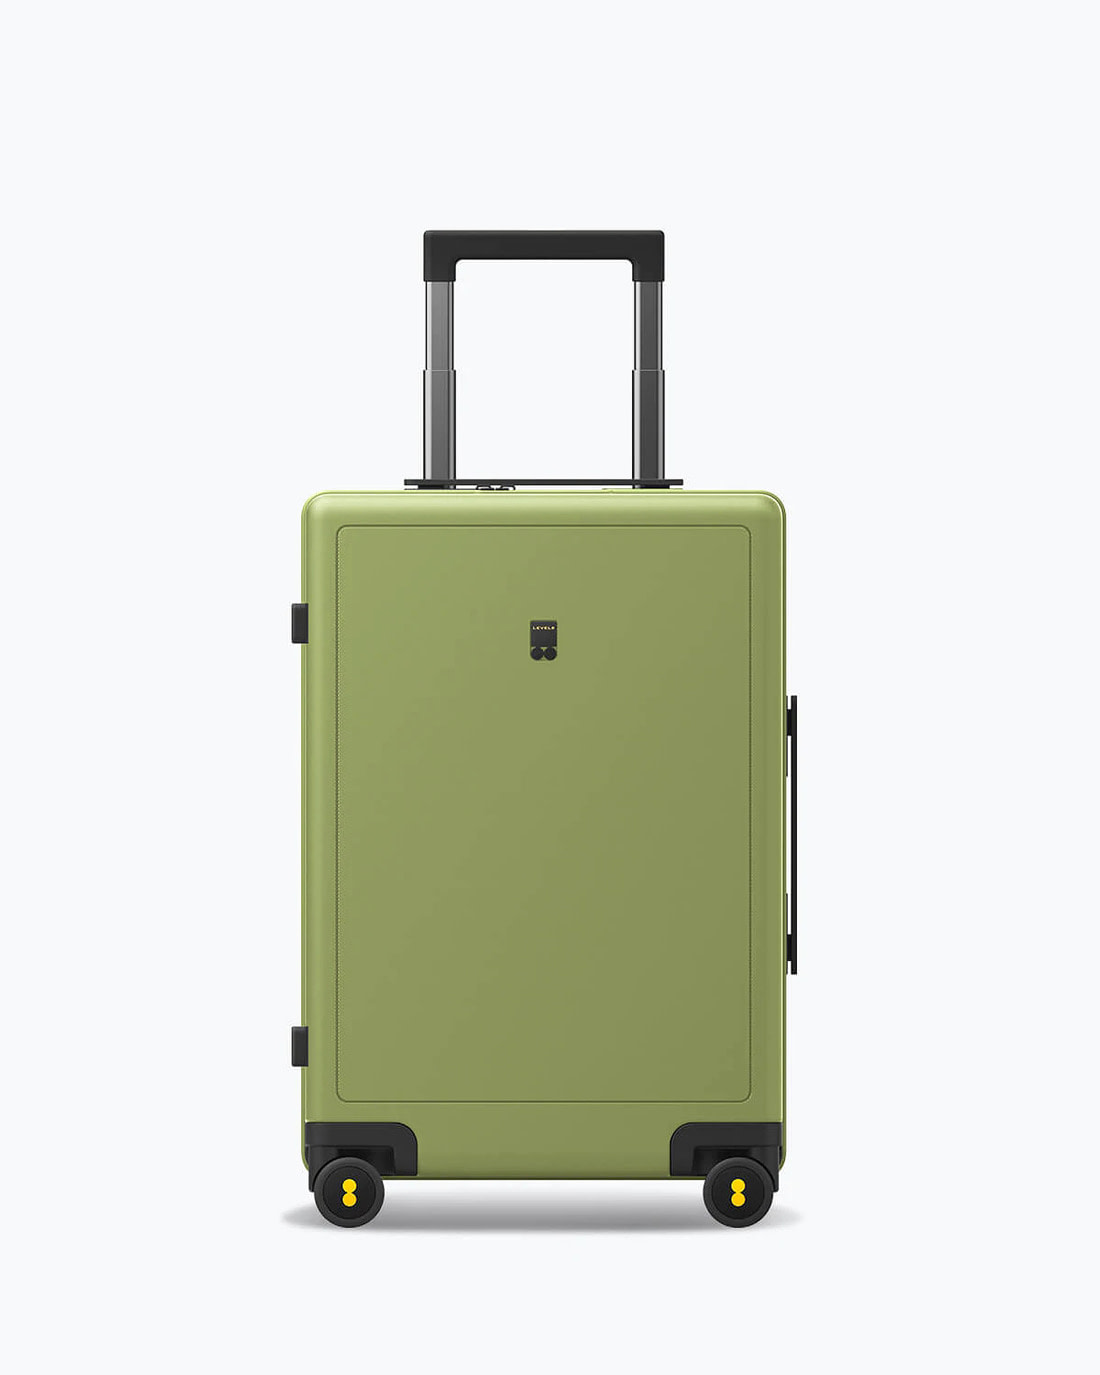 Handsome rolling luggage piece